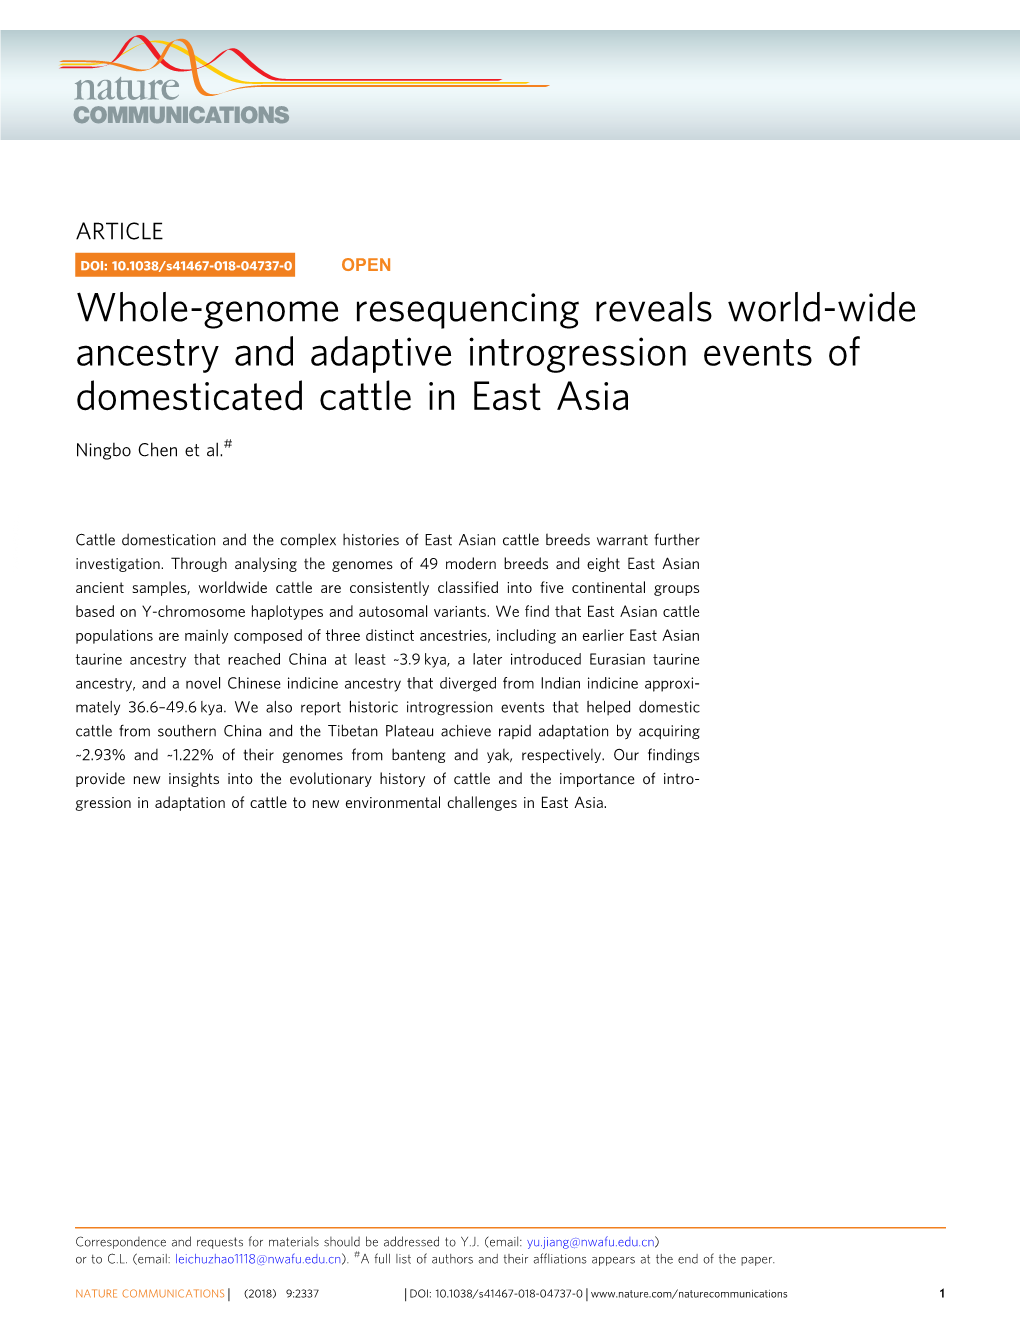 Whole-Genome Resequencing Reveals World-Wide Ancestry and Adaptive Introgression Events of Domesticated Cattle in East Asia